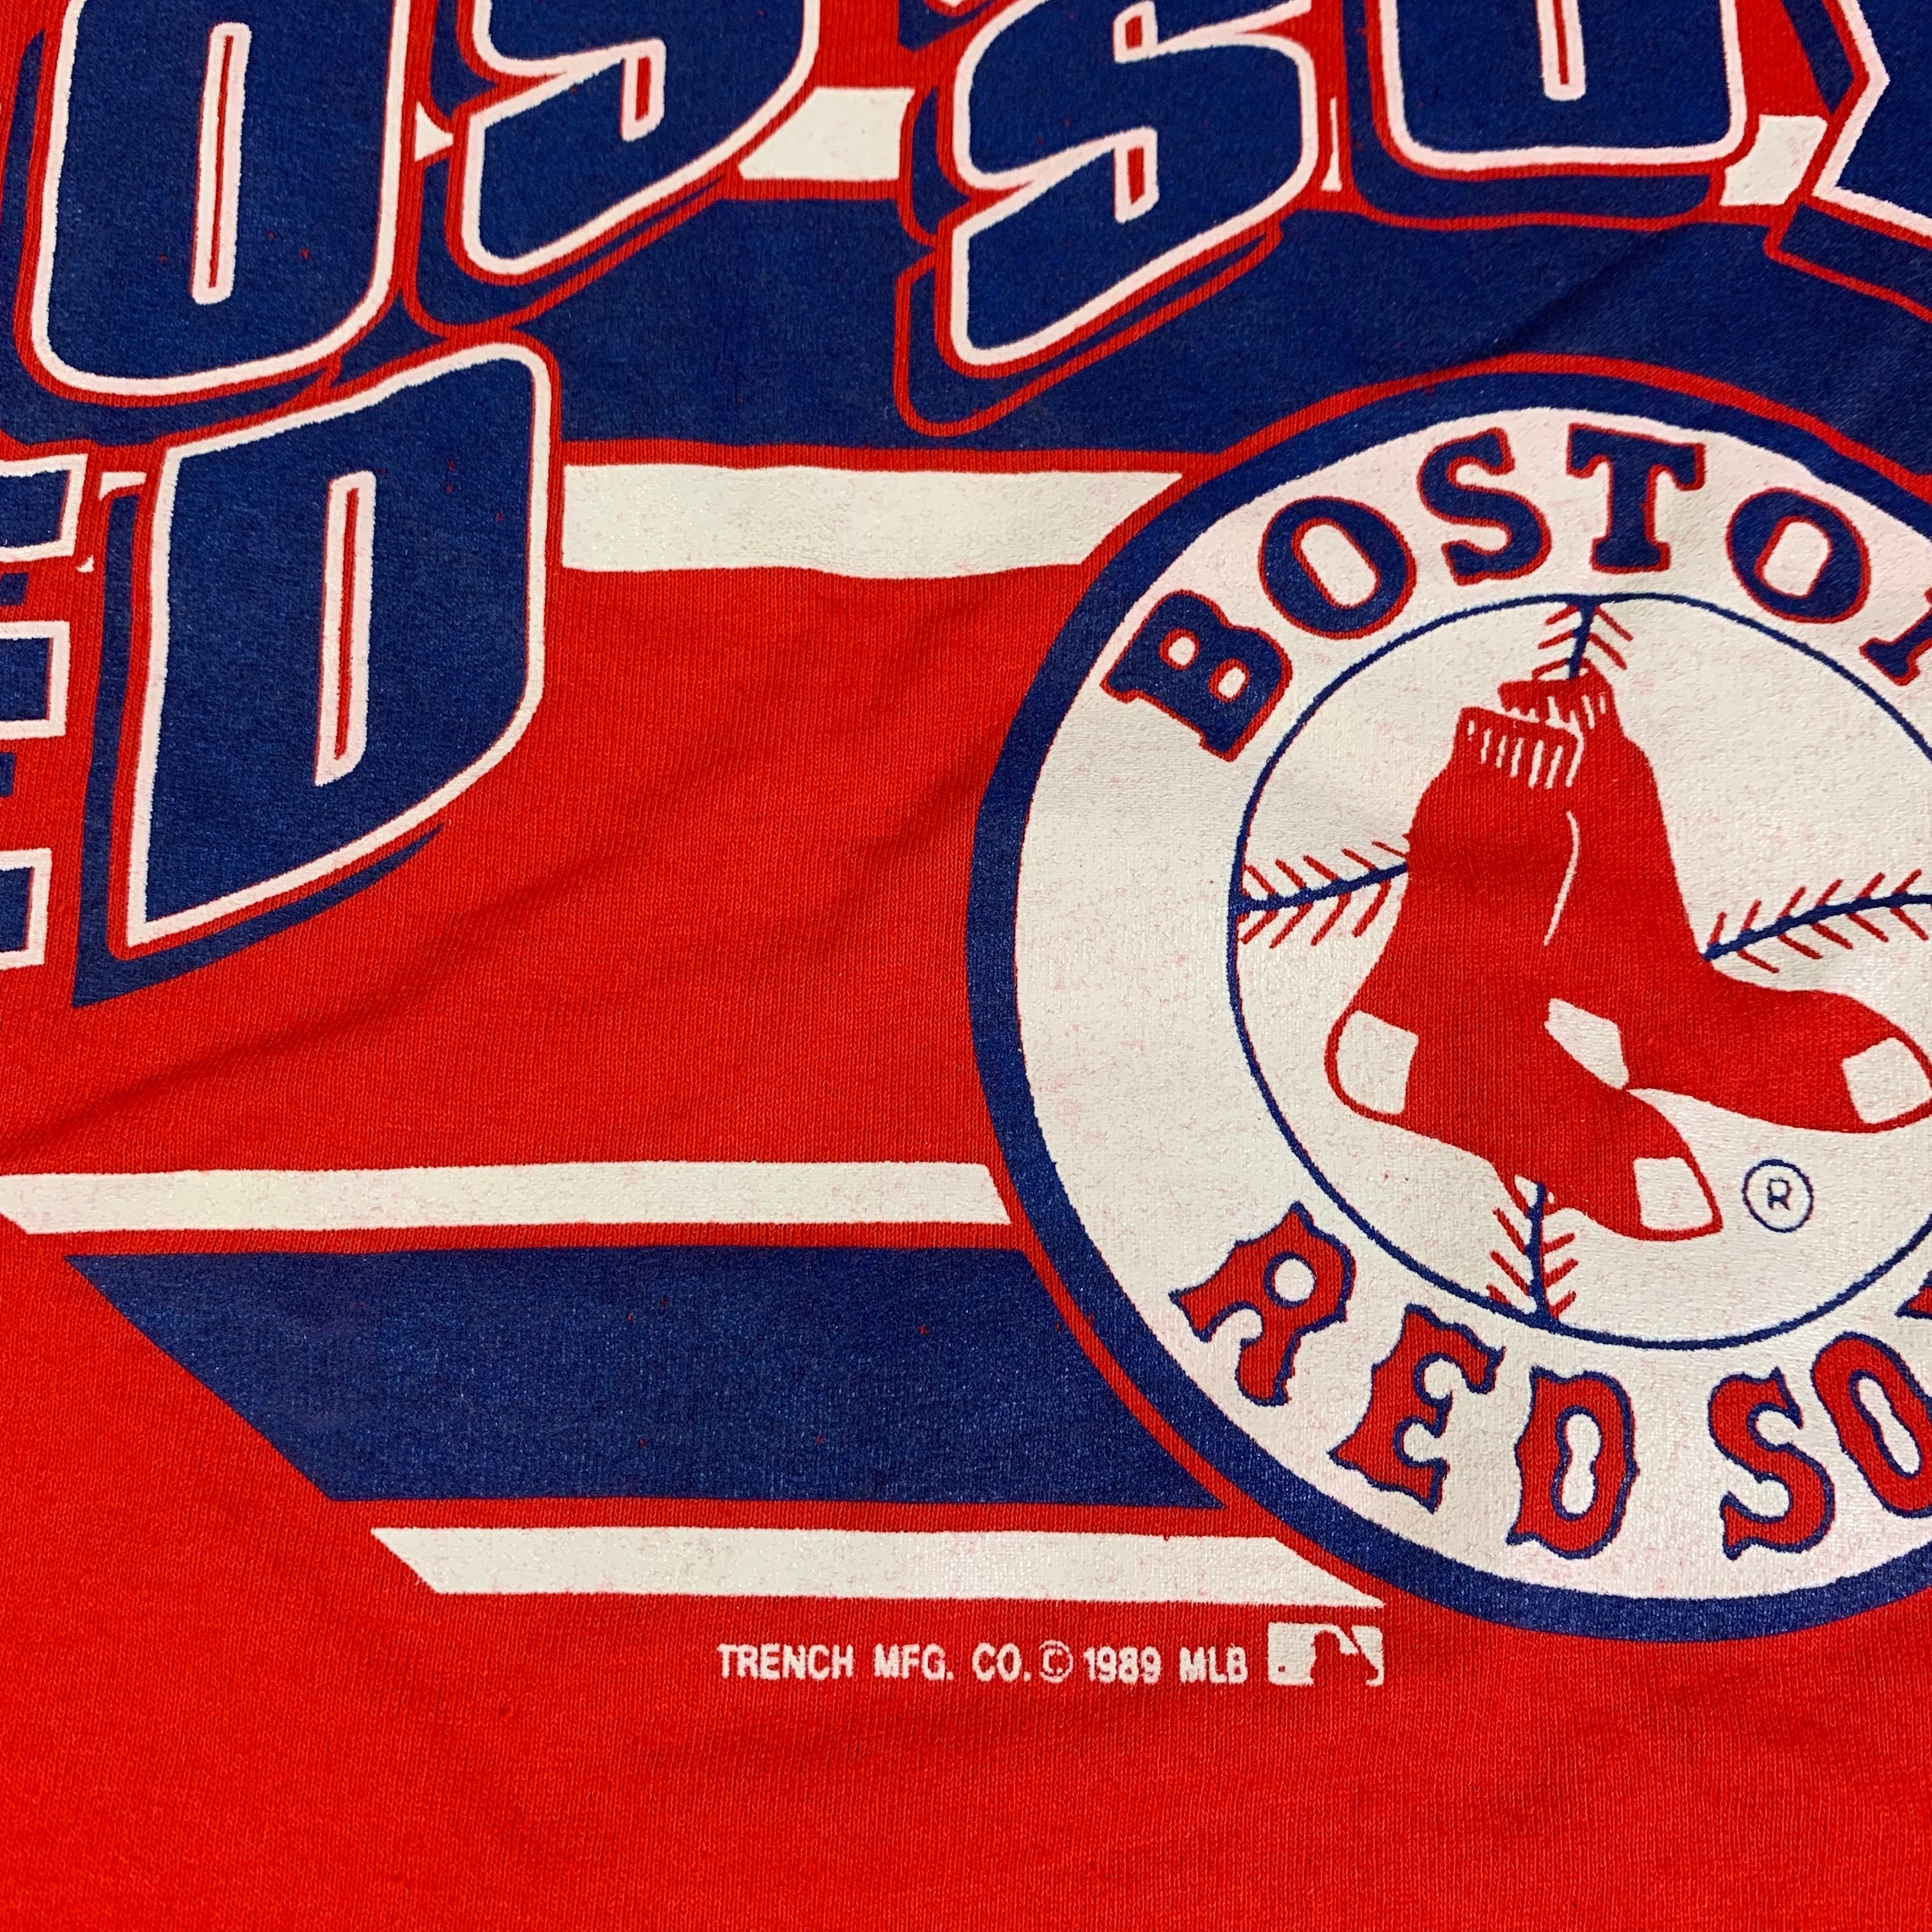 Boston Red Sox Vintage Graphic t-shirt (RARE one of a kind)